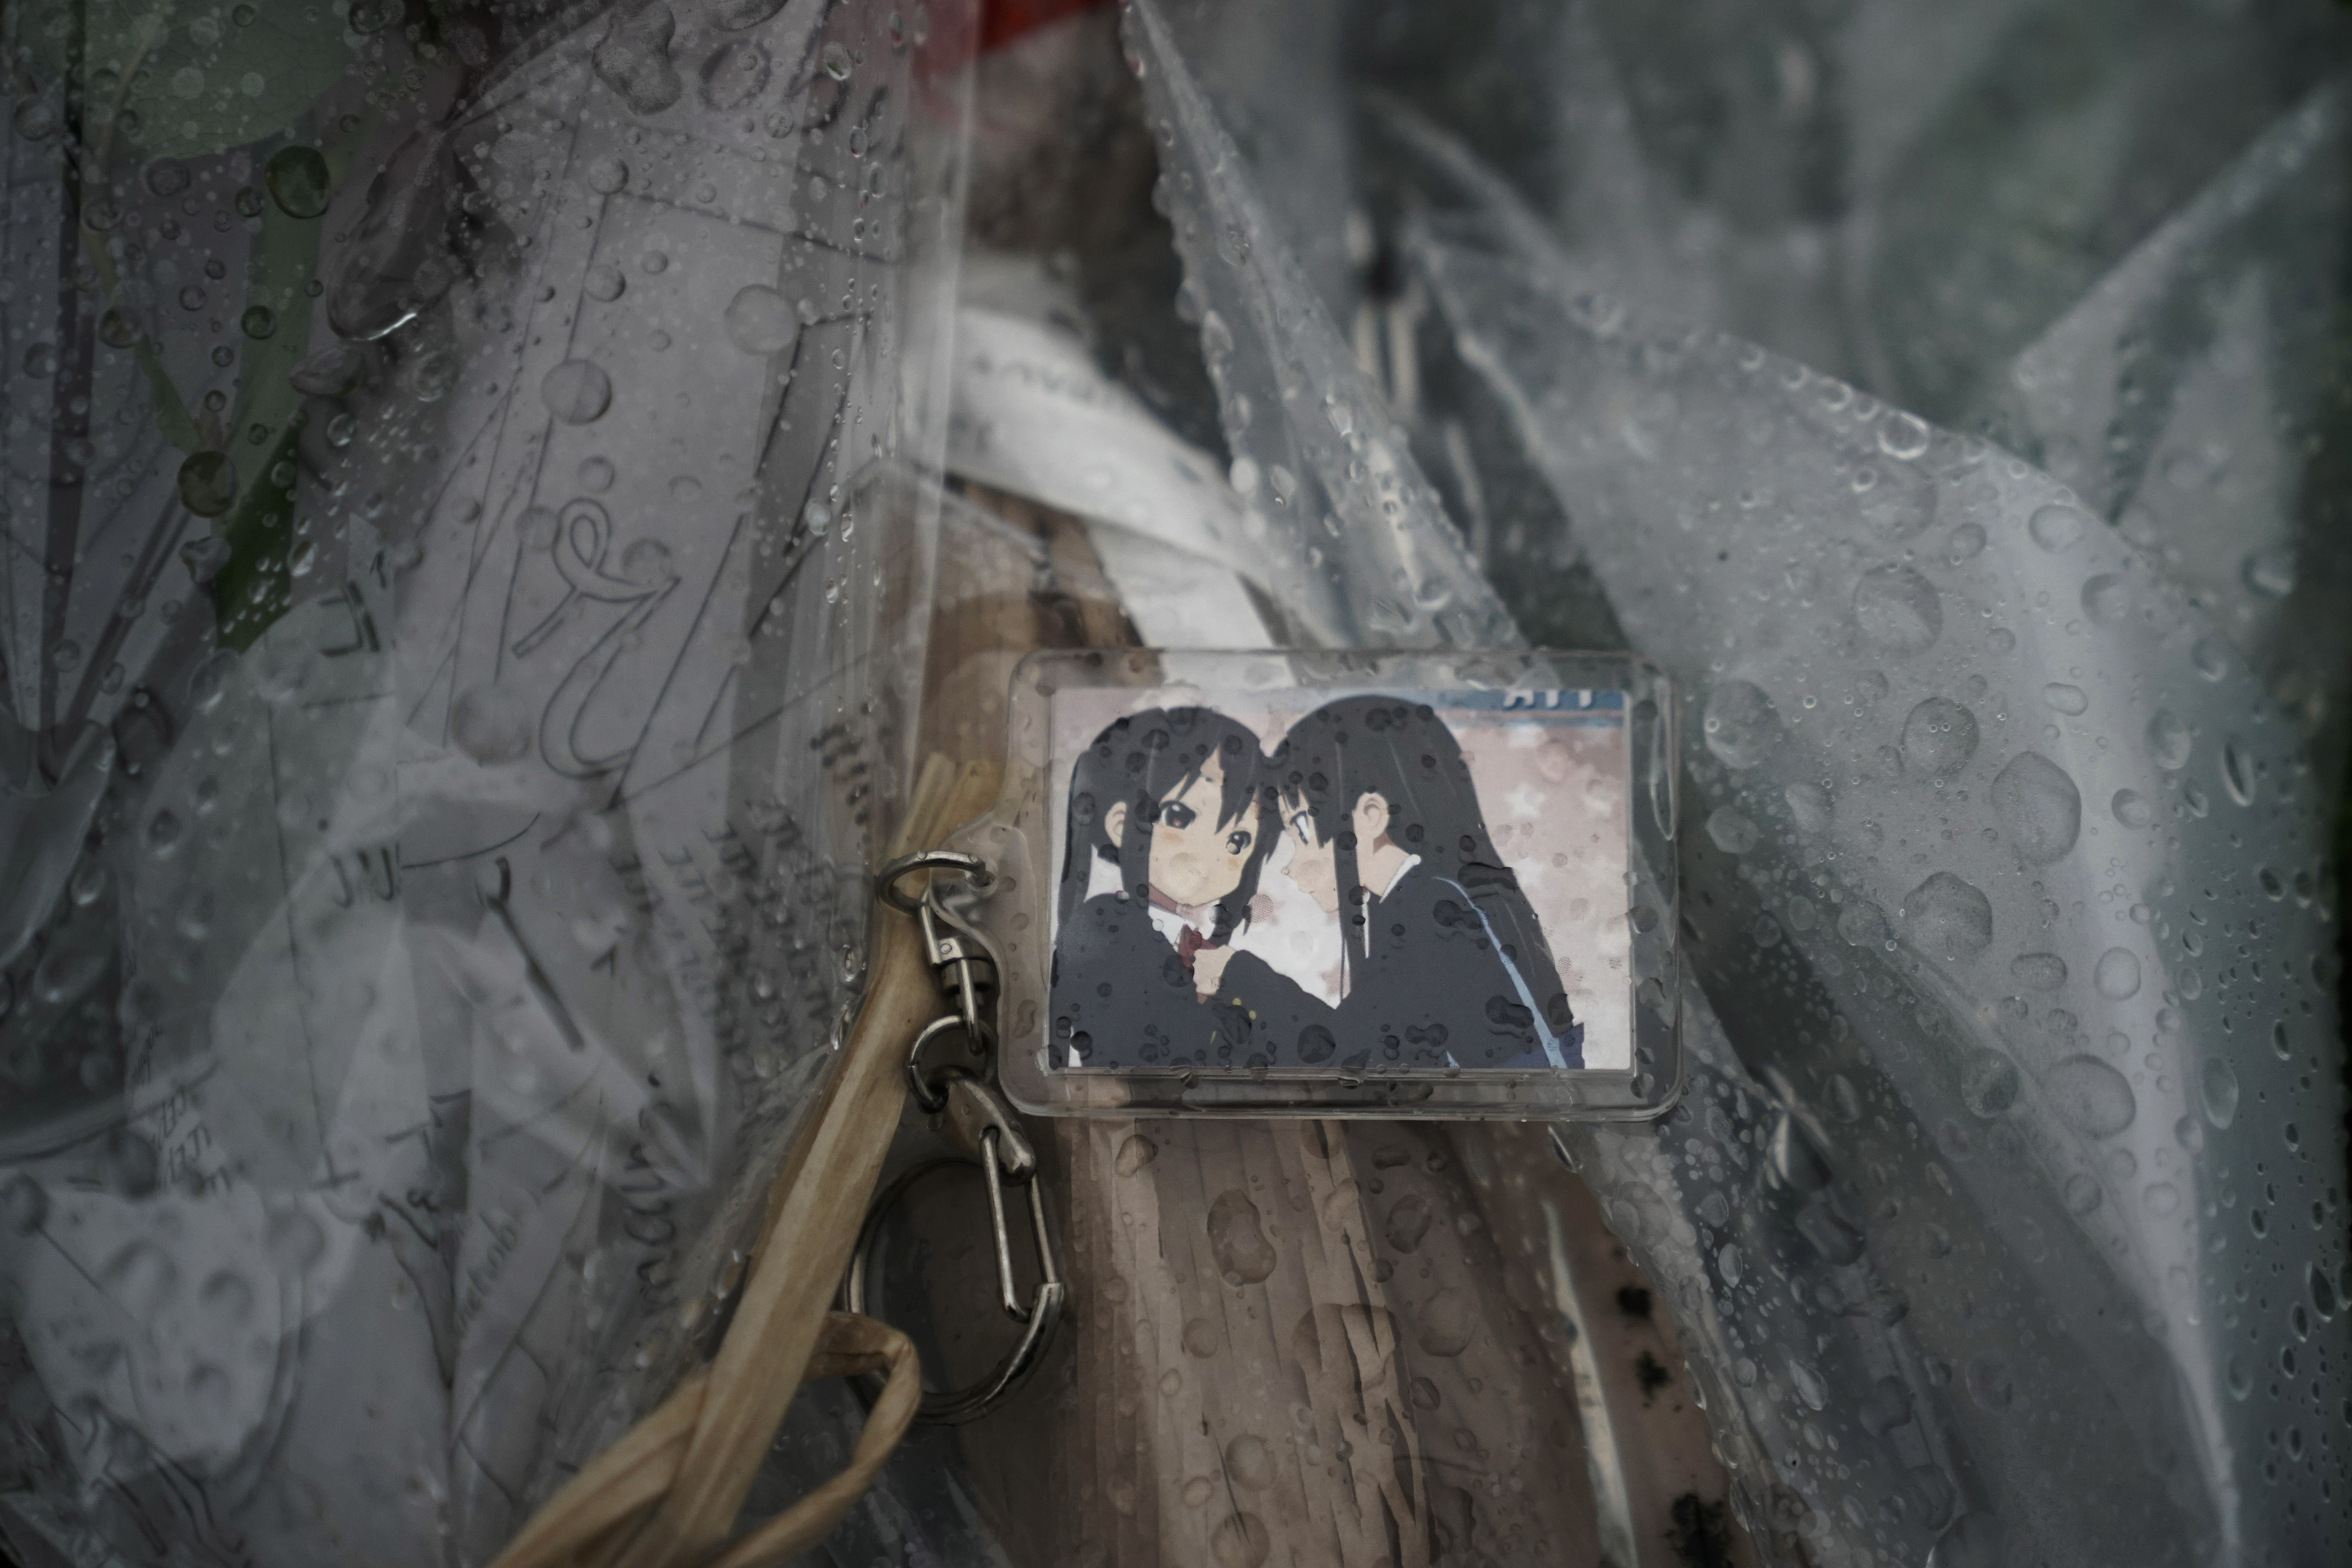 KyoAni studio destroyed in deadly arson attack 'brought revolutionary  change to Japan animation', fans say | South China Morning Post